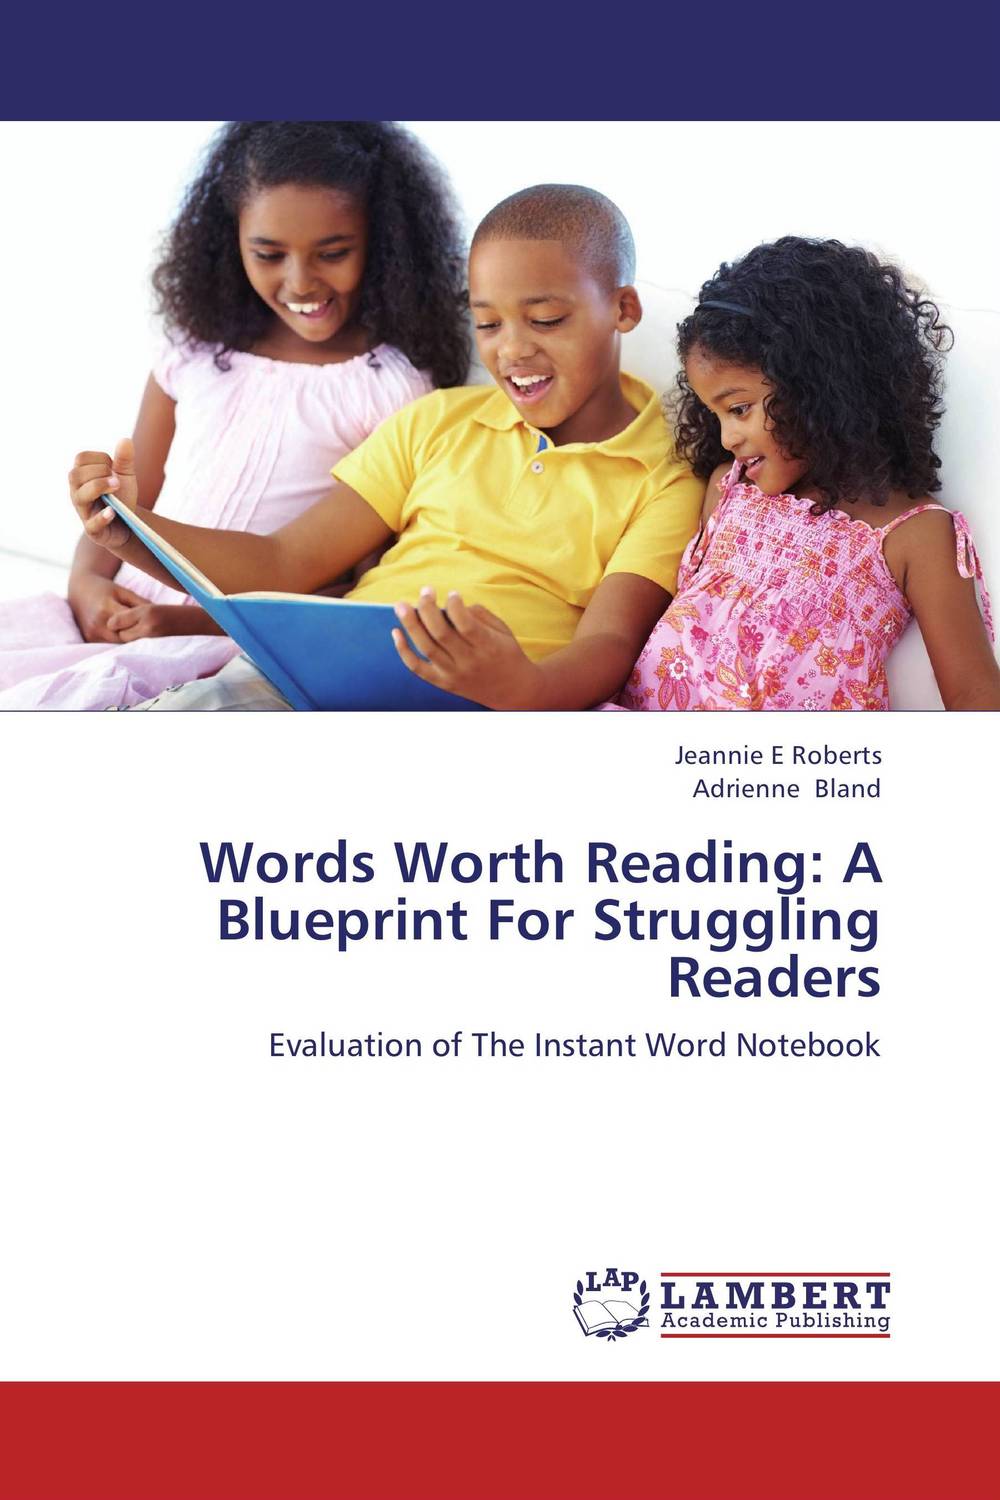 Words Worth Reading: A Blueprint For Struggling Readers